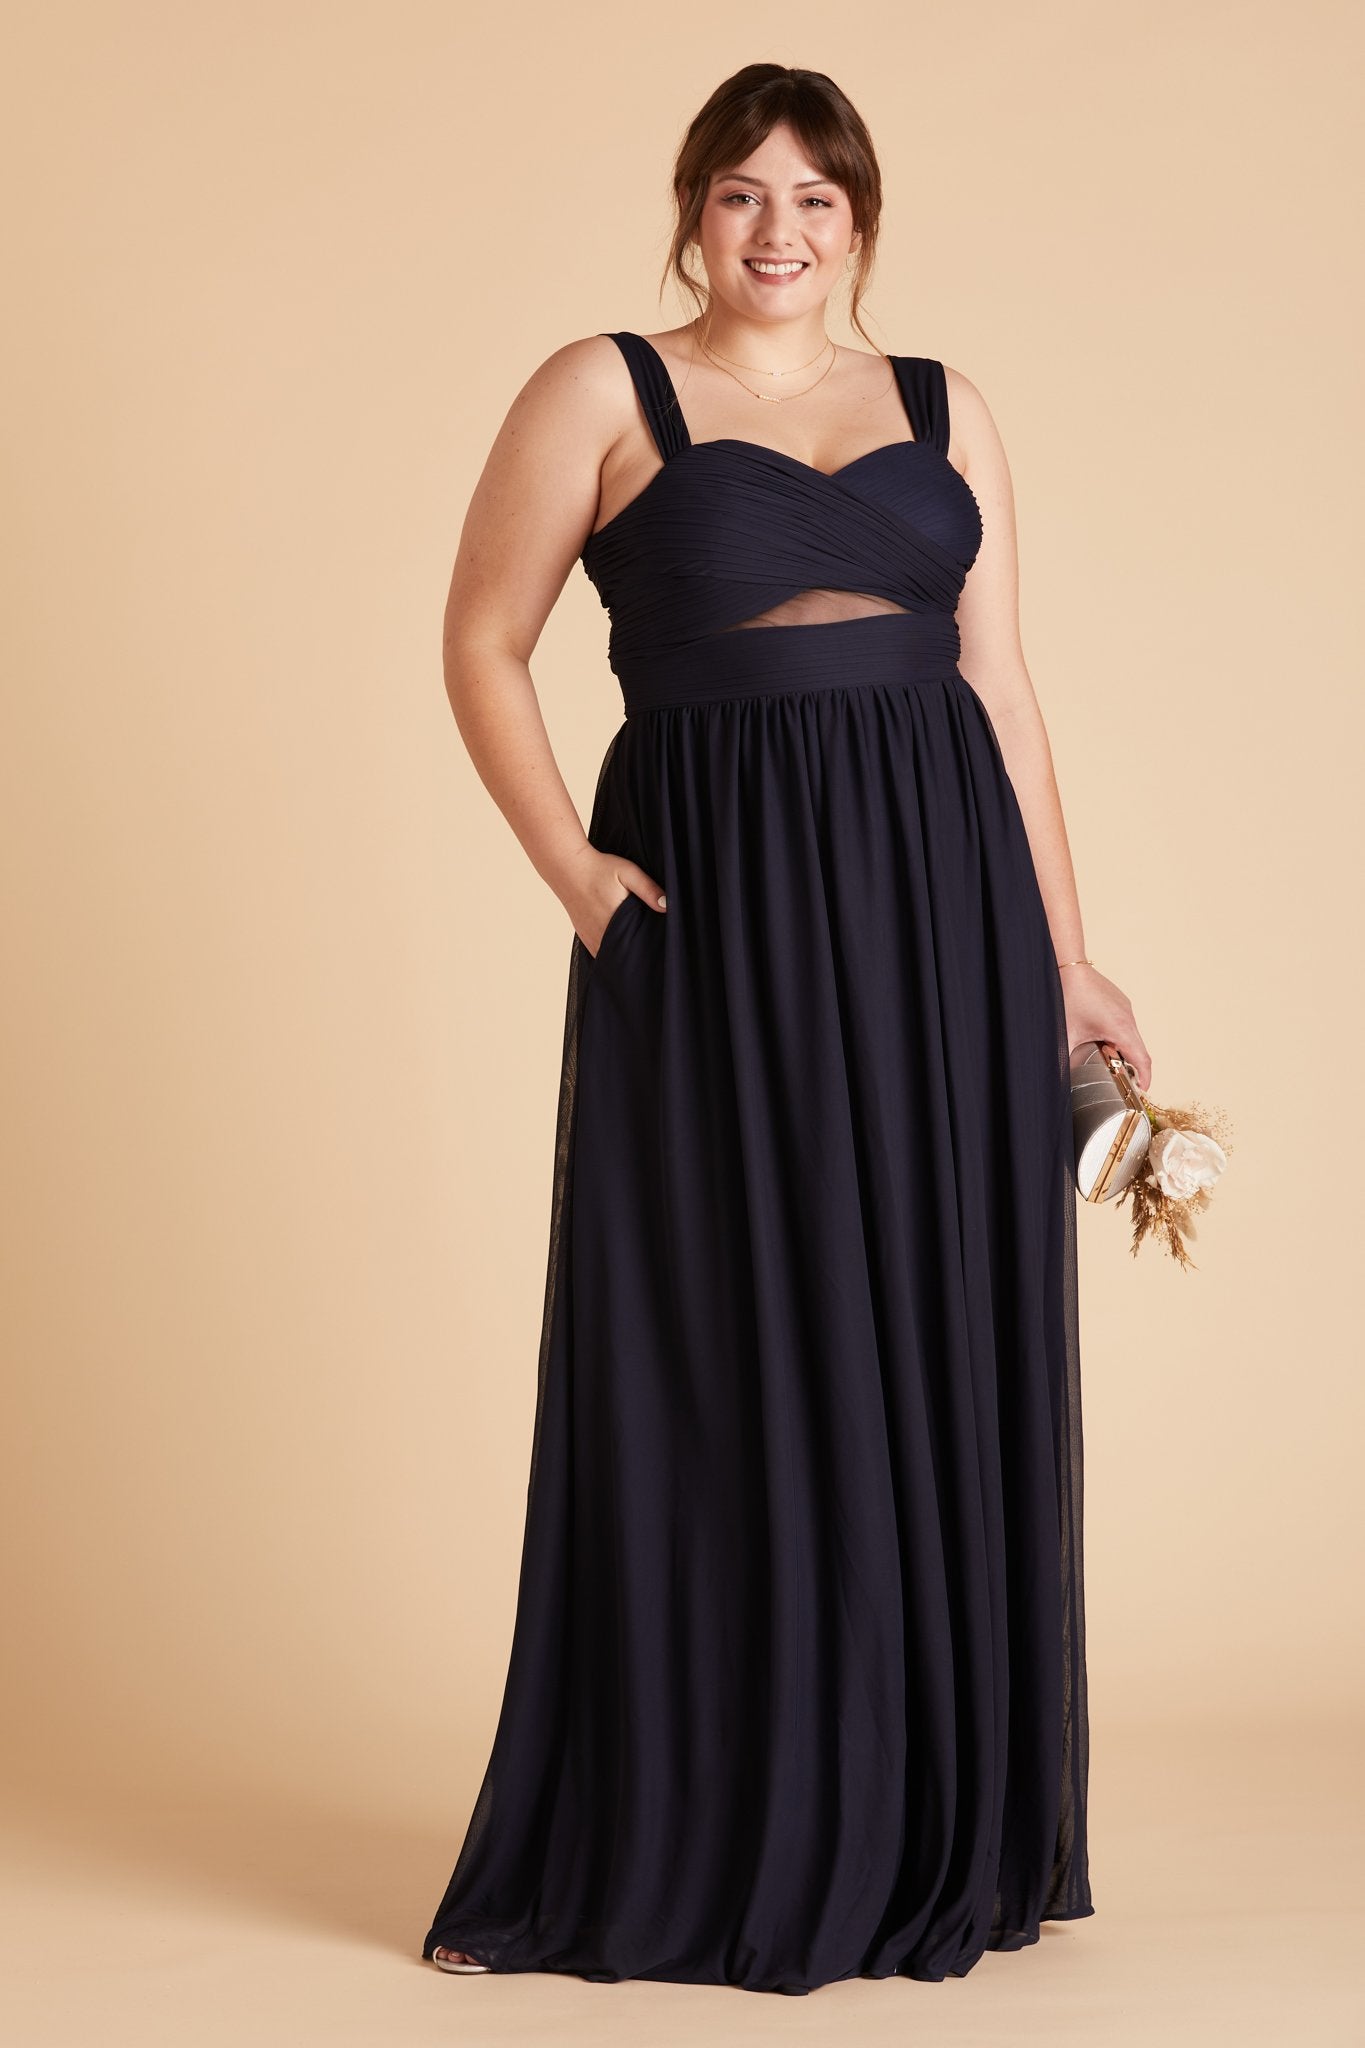 Elsye plus size bridesmaid dress in navy blue chiffon by Birdy Grey, front view with hand in pocket